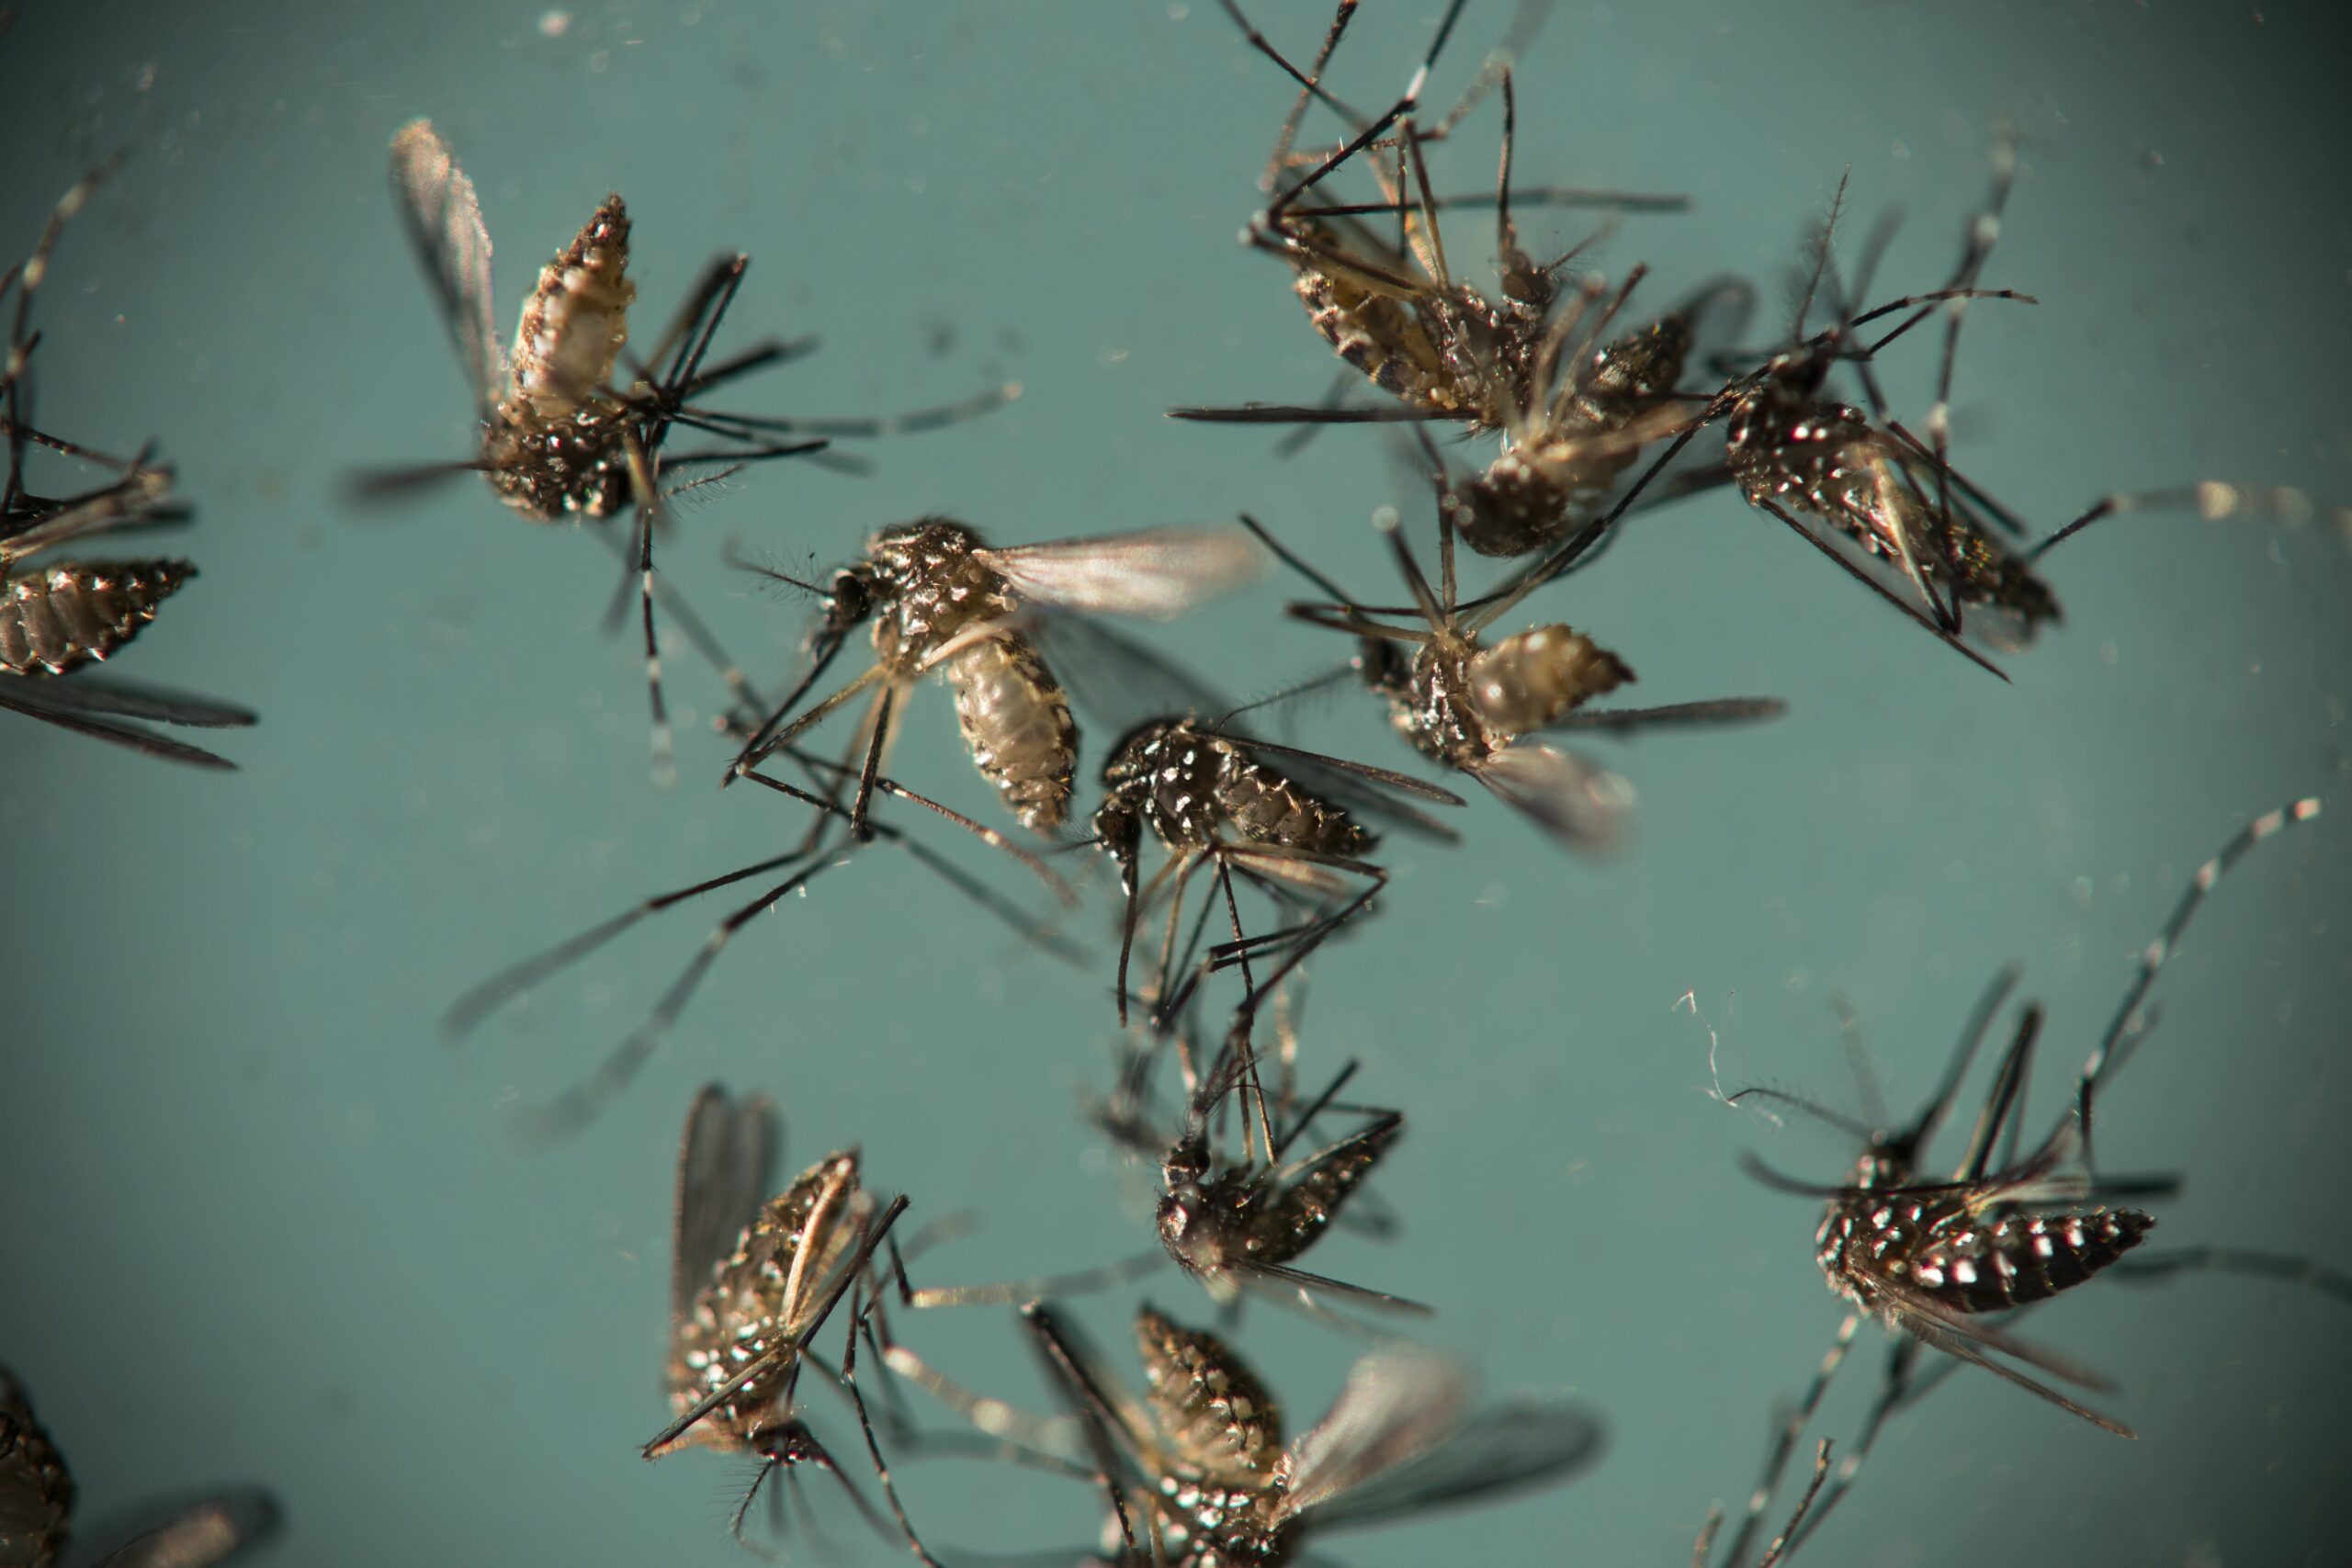 UW Researchers: Zika May Increase Risk Of Miscarriage